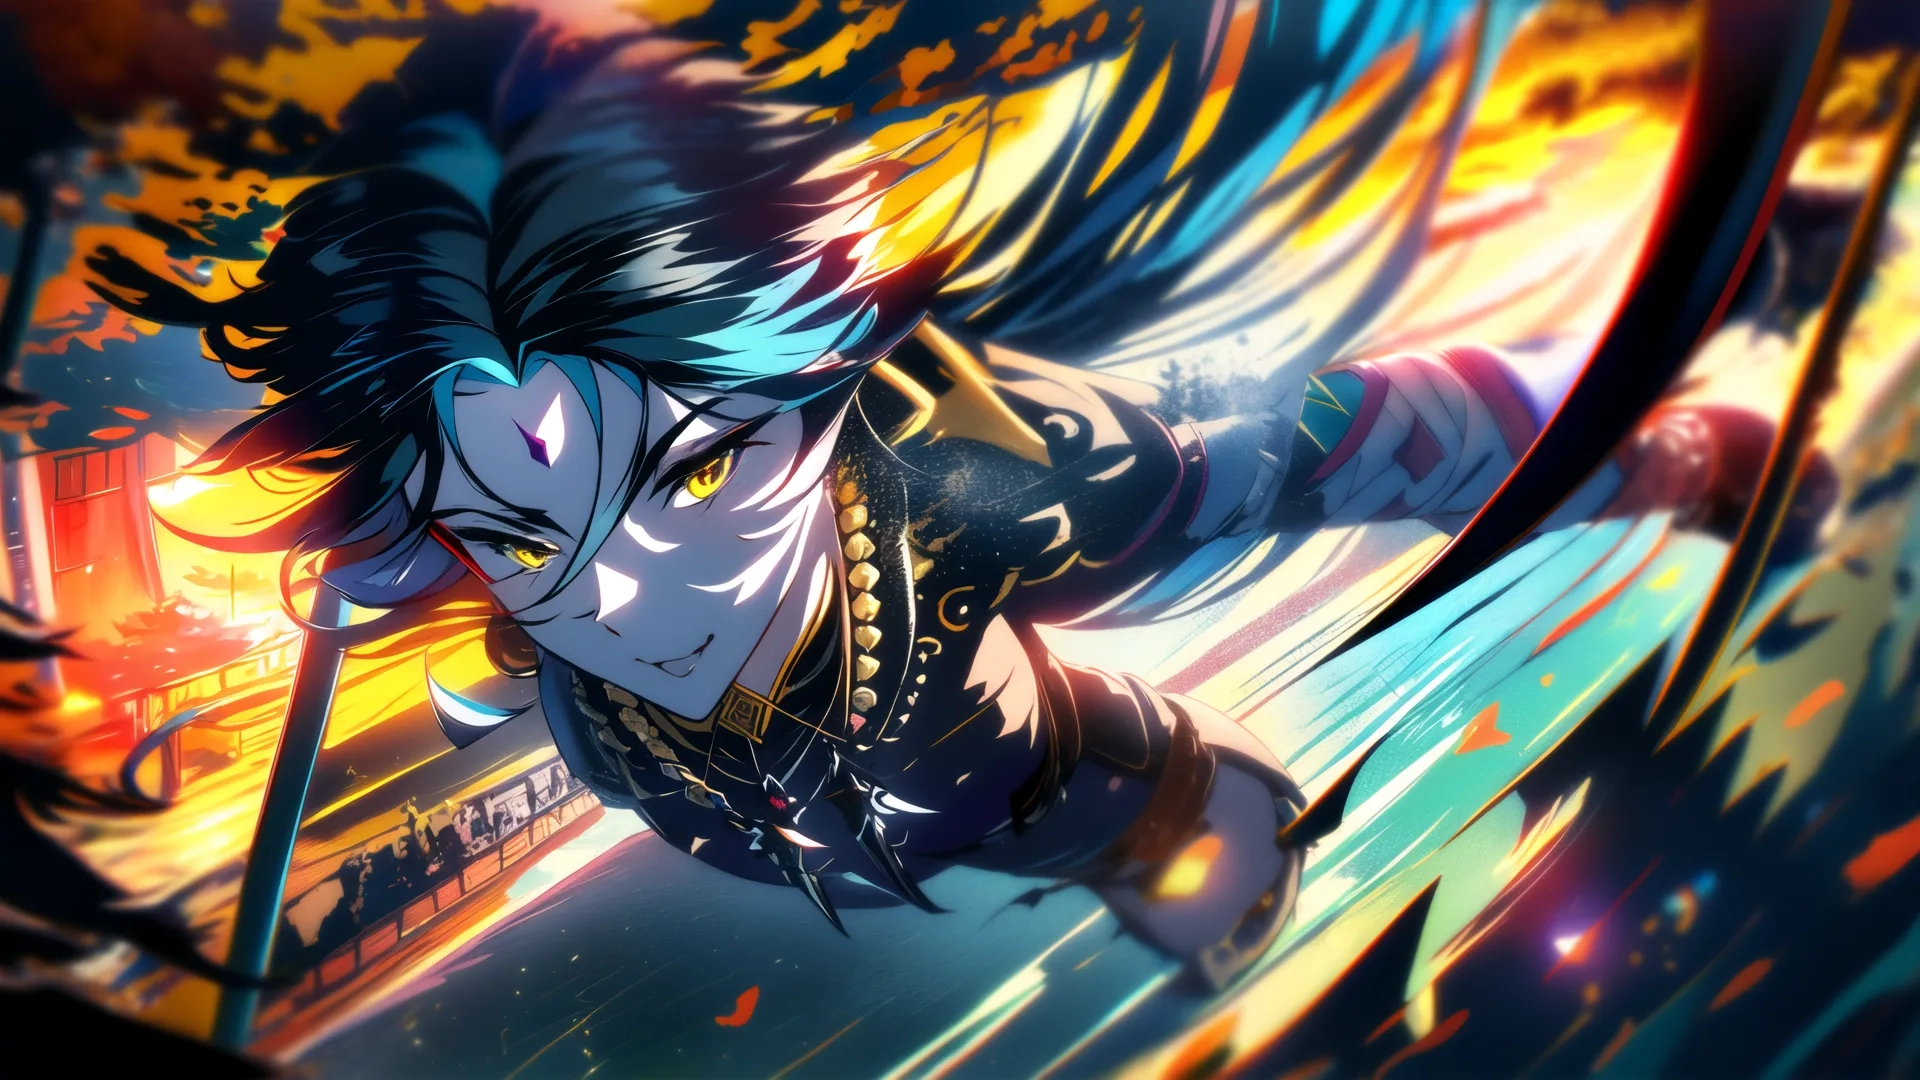 anime characters are wearing black and blue eyes, arms raised and flying a sword through the air towards the ground there is fire on the background behind him
